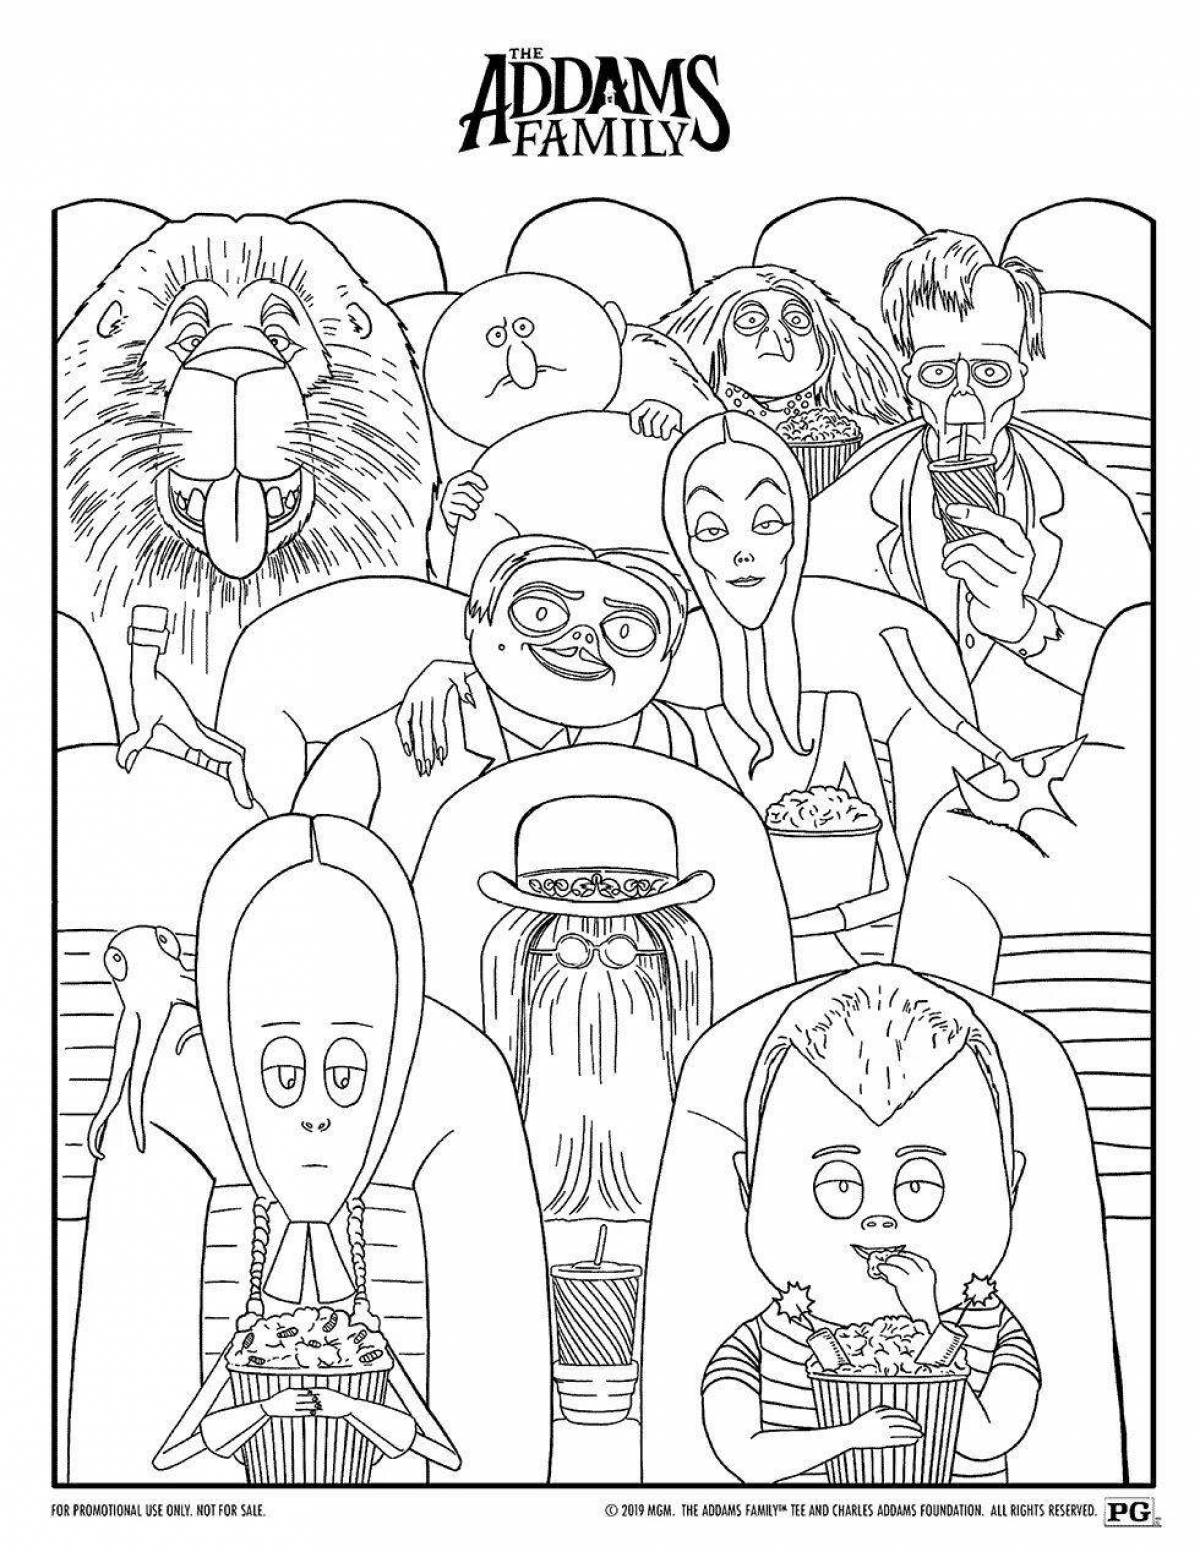 Animated adams family coloring page